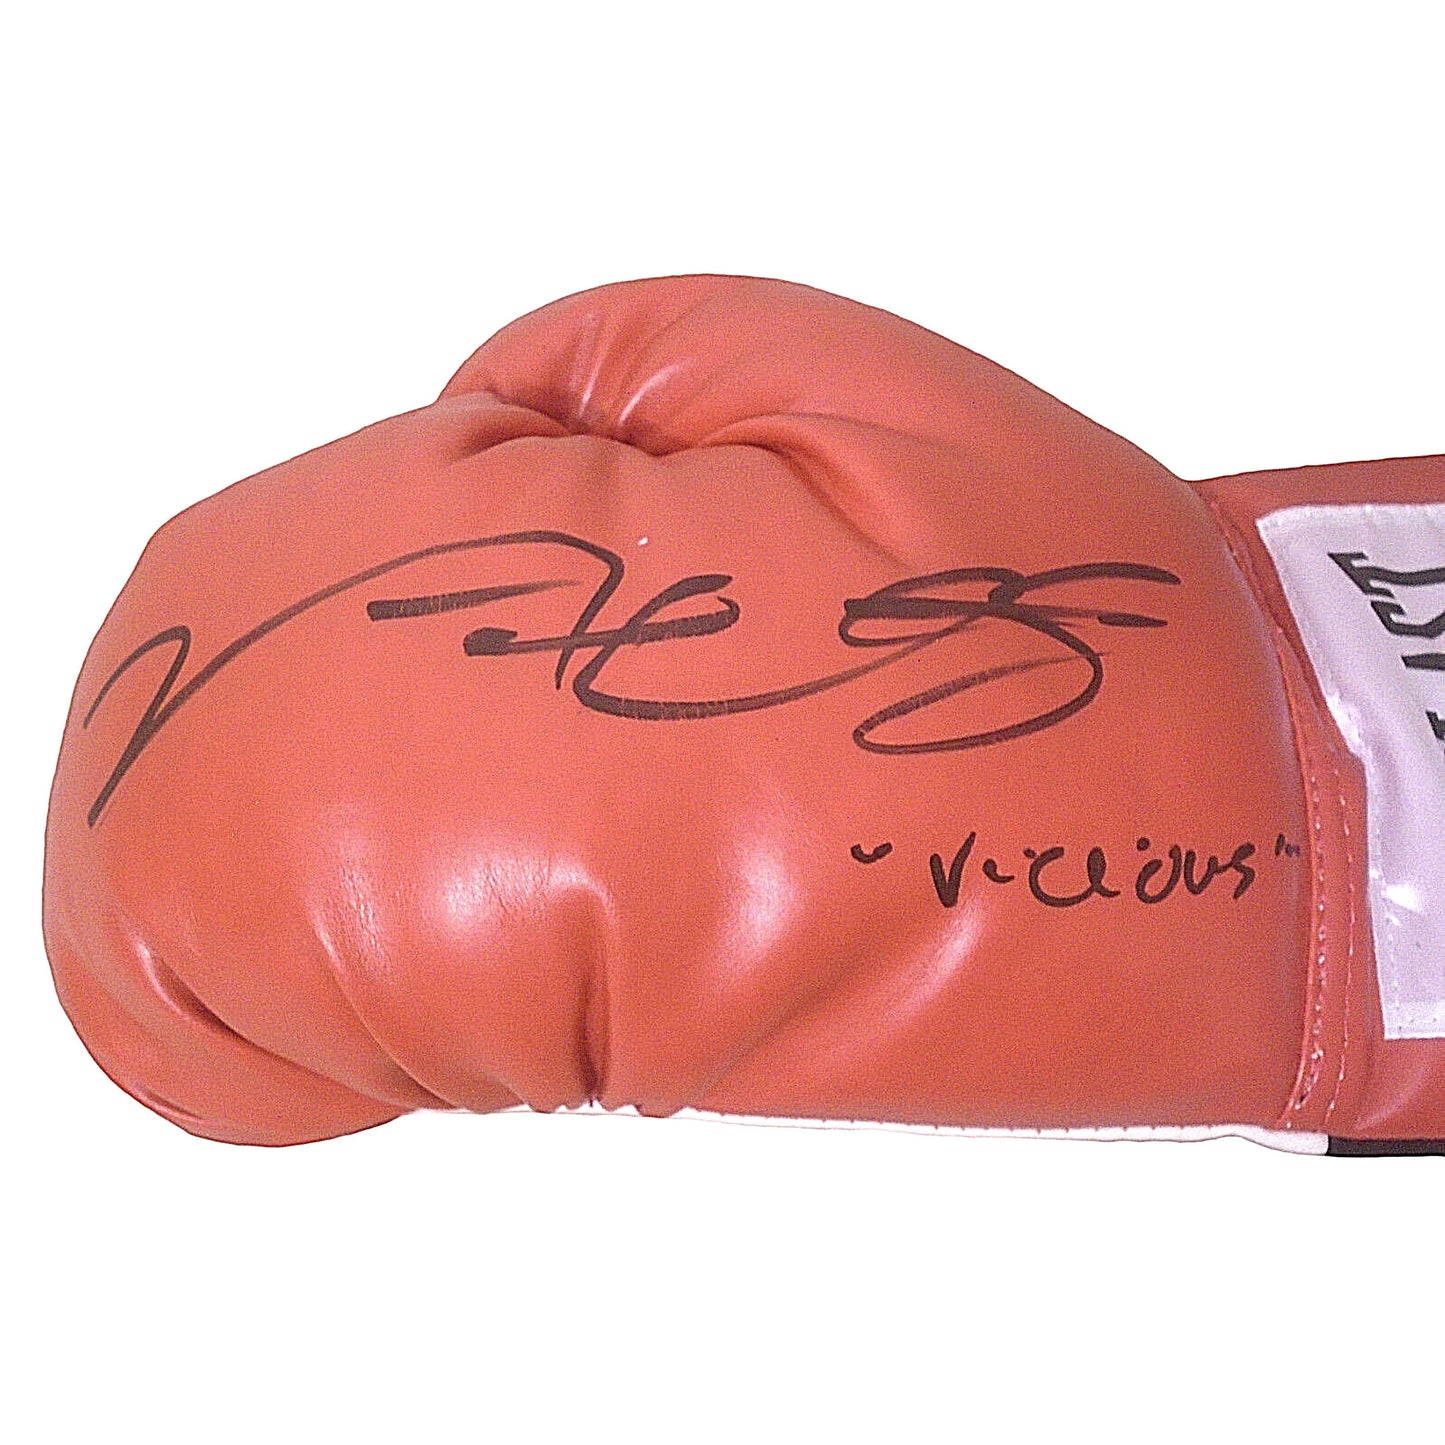 Boxing Gloves-Autographed - Victor Ortiz Signed Everlast Red Boxing Glove W/ Inscription - Beckett BAS 201b